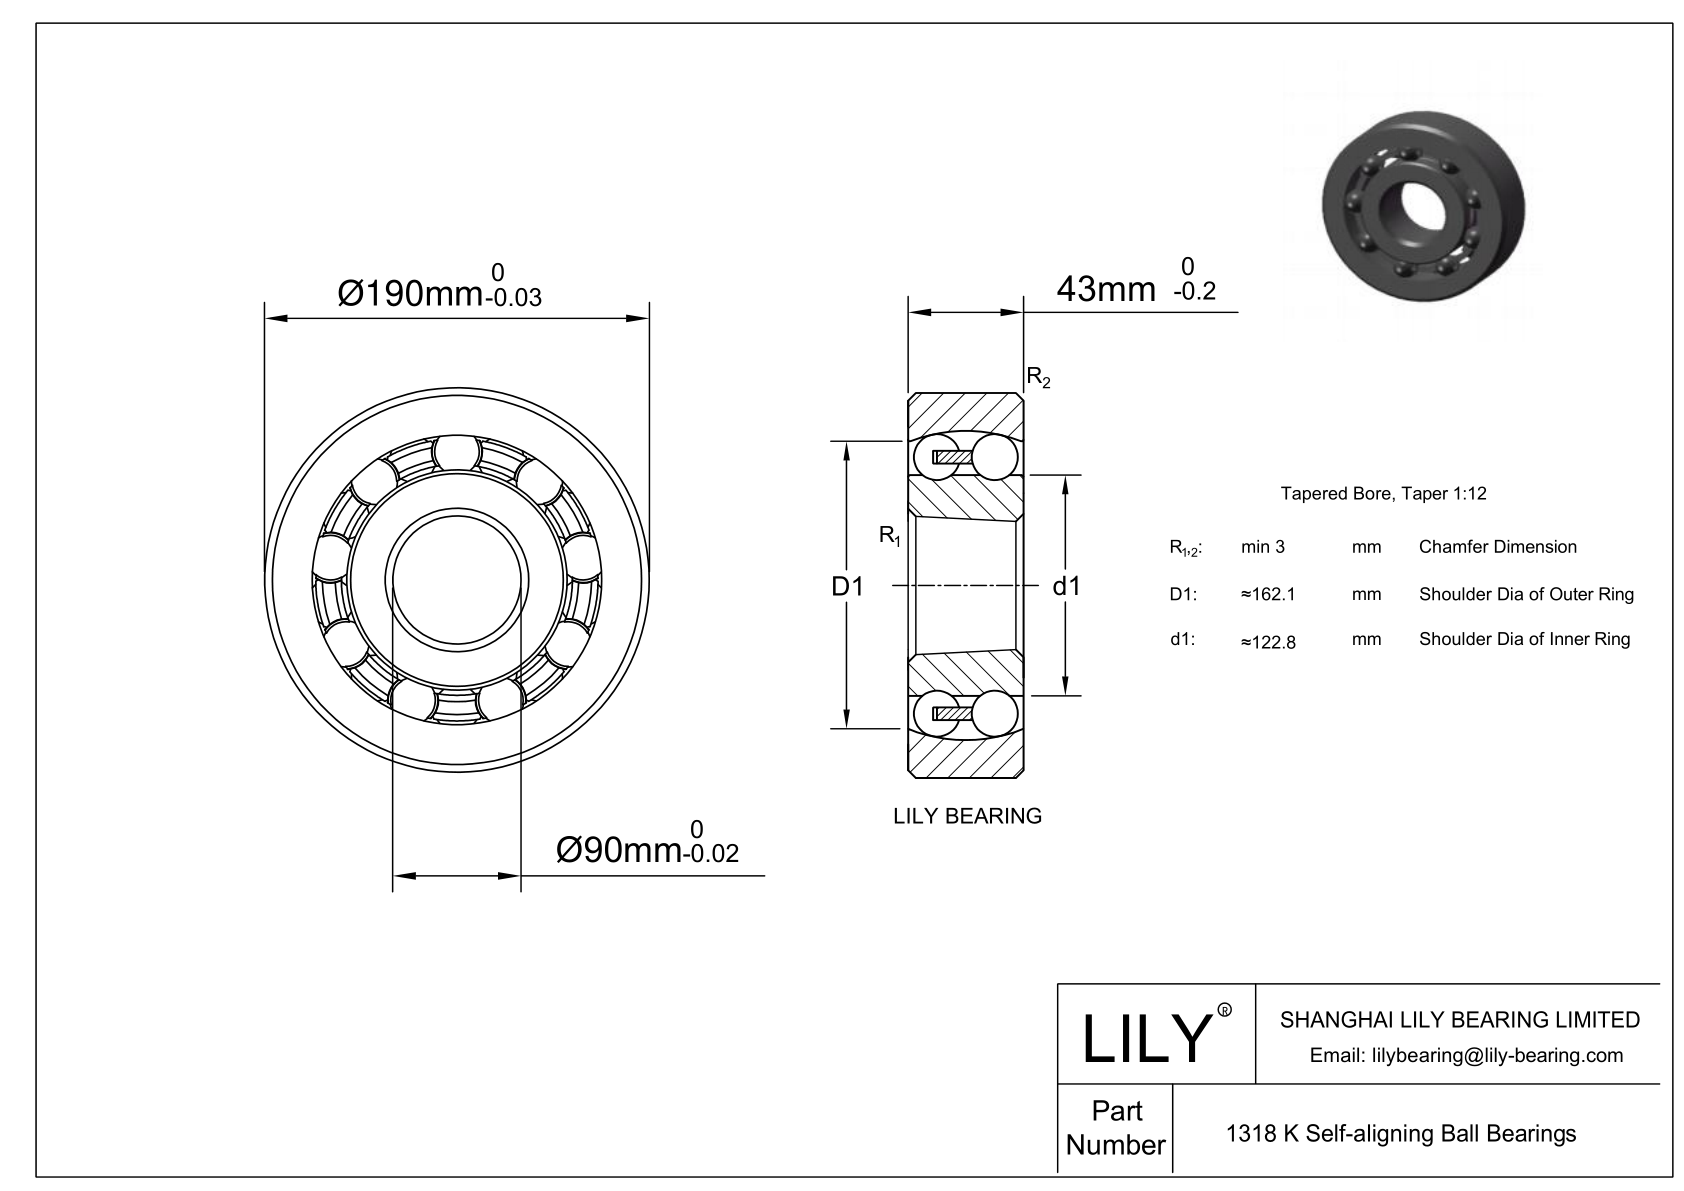 S1318 K Stainless Steel Self Aligning Ball Bearings cad drawing